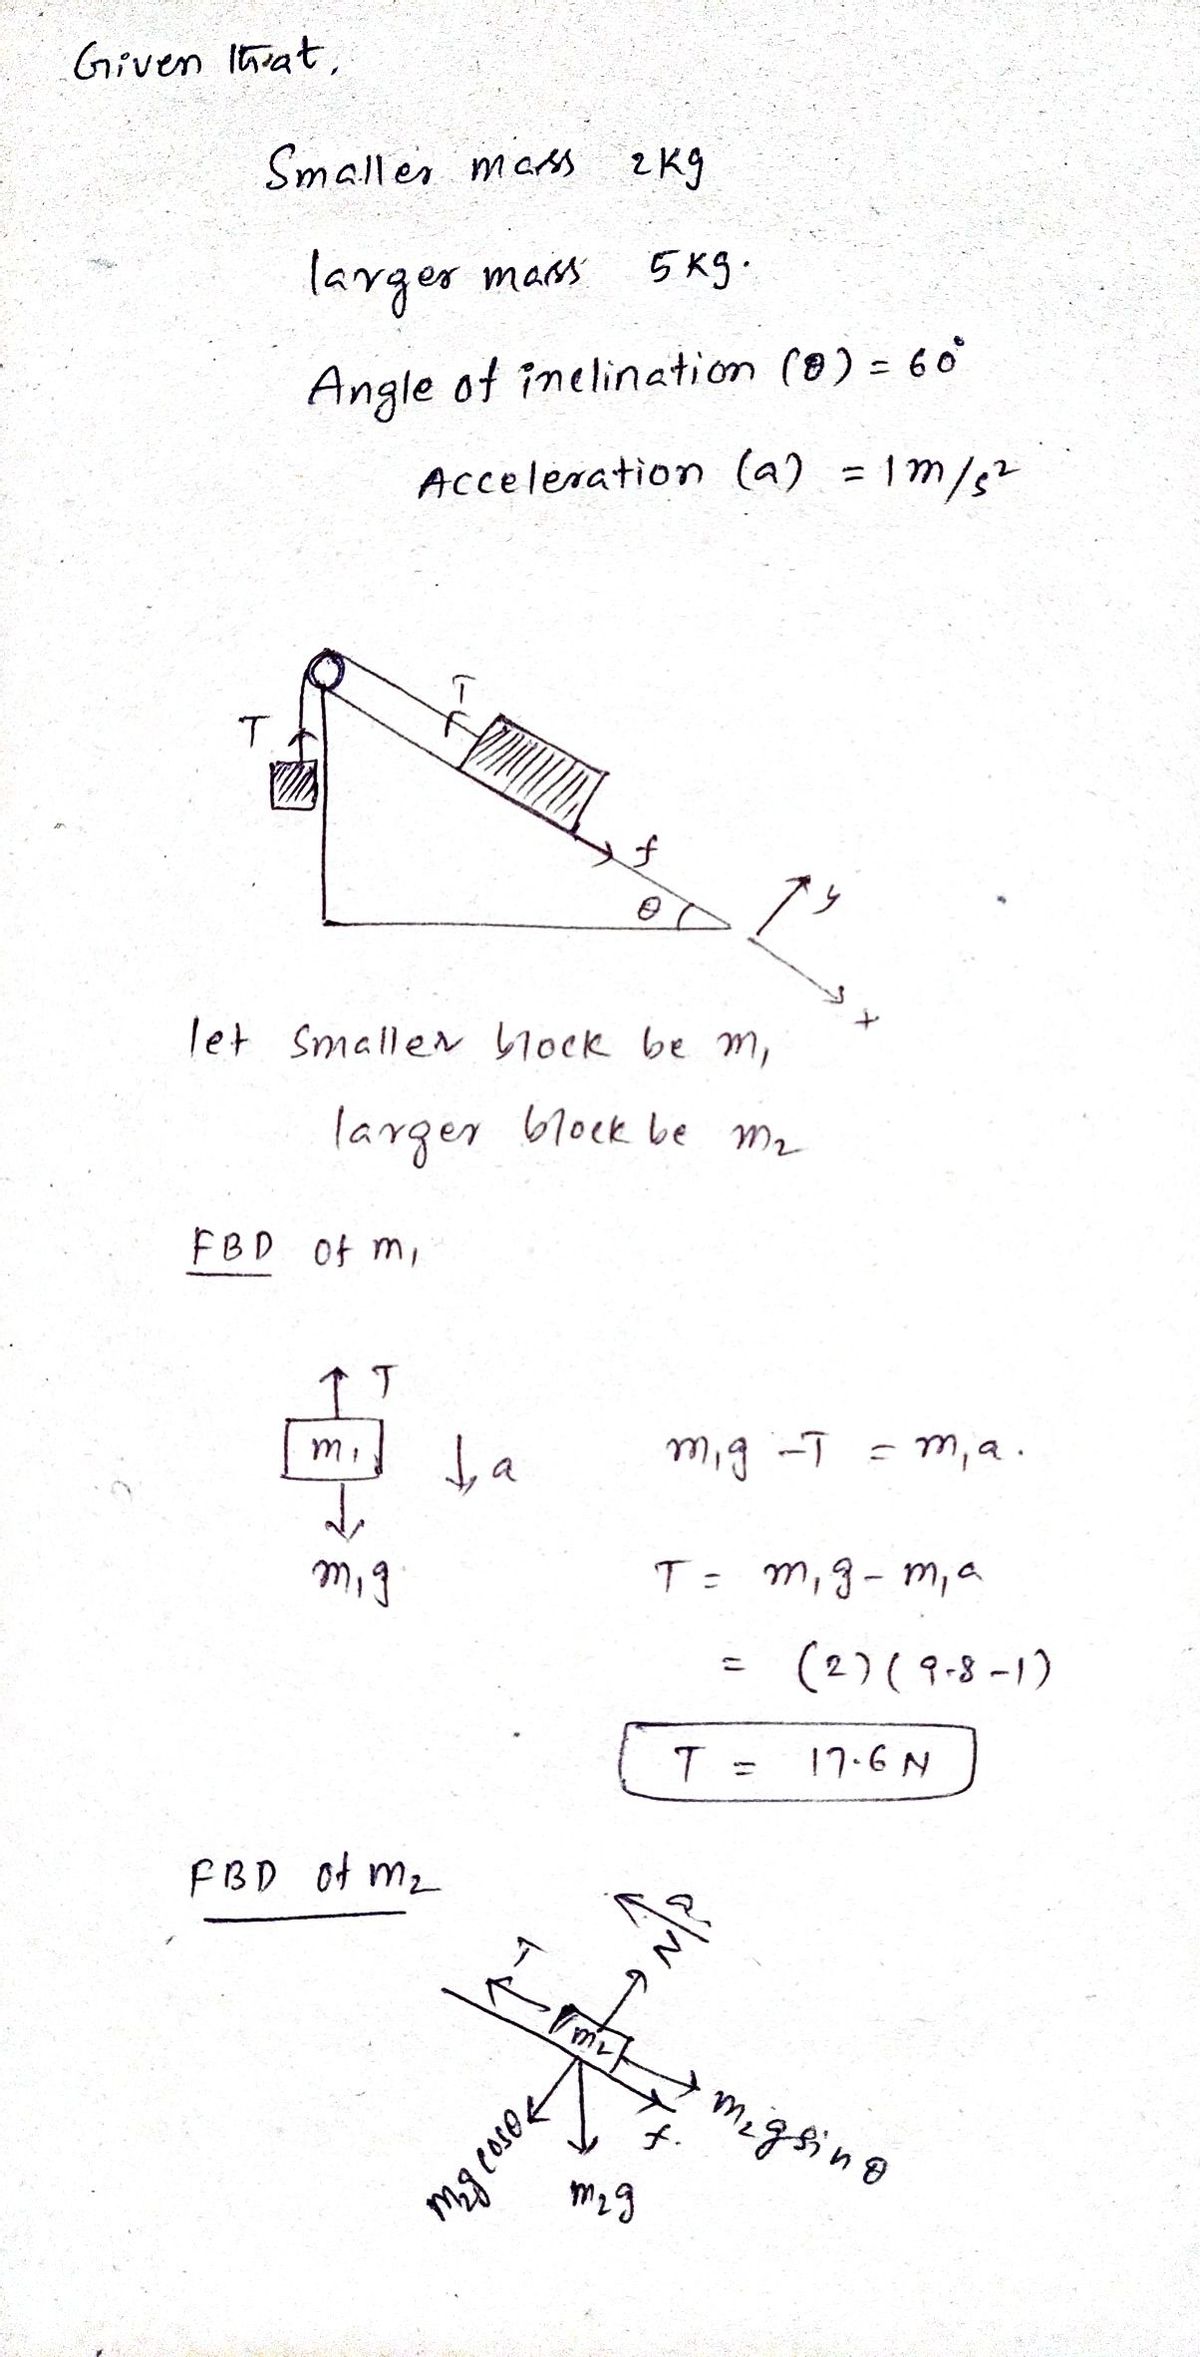 Physics homework question answer, step 2, image 1